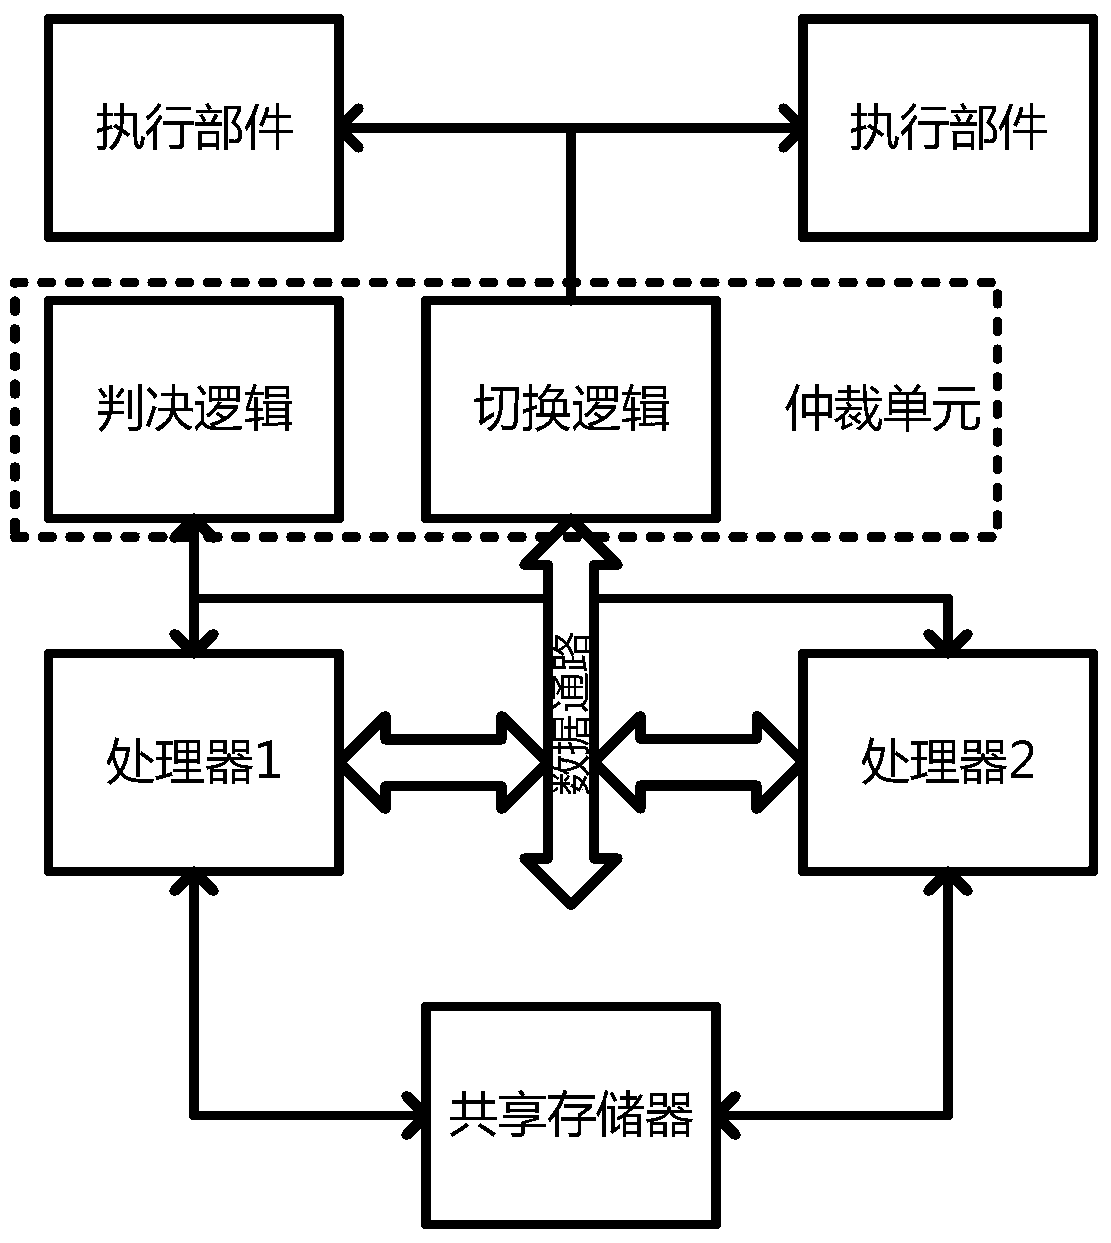 A Hot Switching Method of Dual-mode Redundant Microprocessor